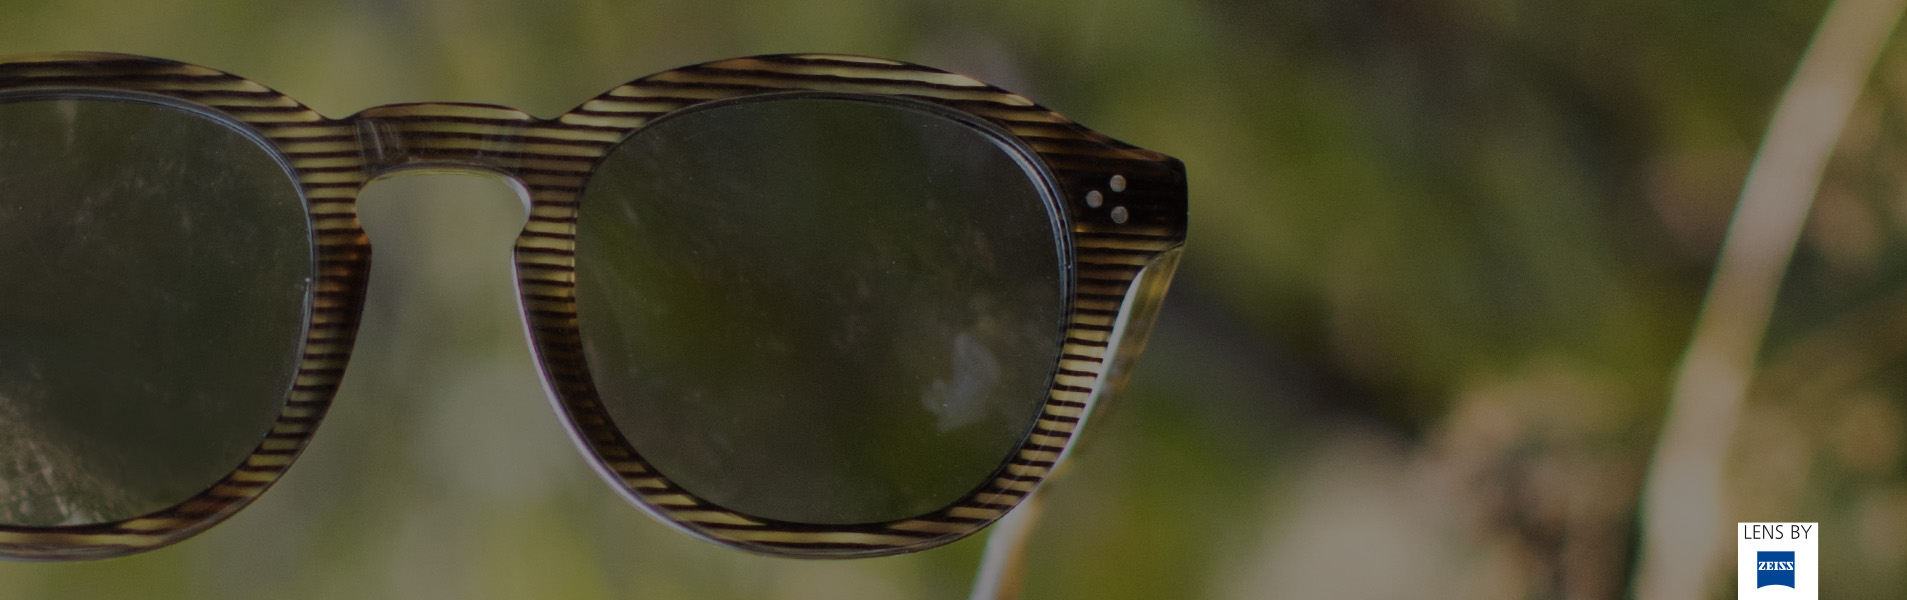 Image of the Out Of Brera acetate sunglasses during a sport day